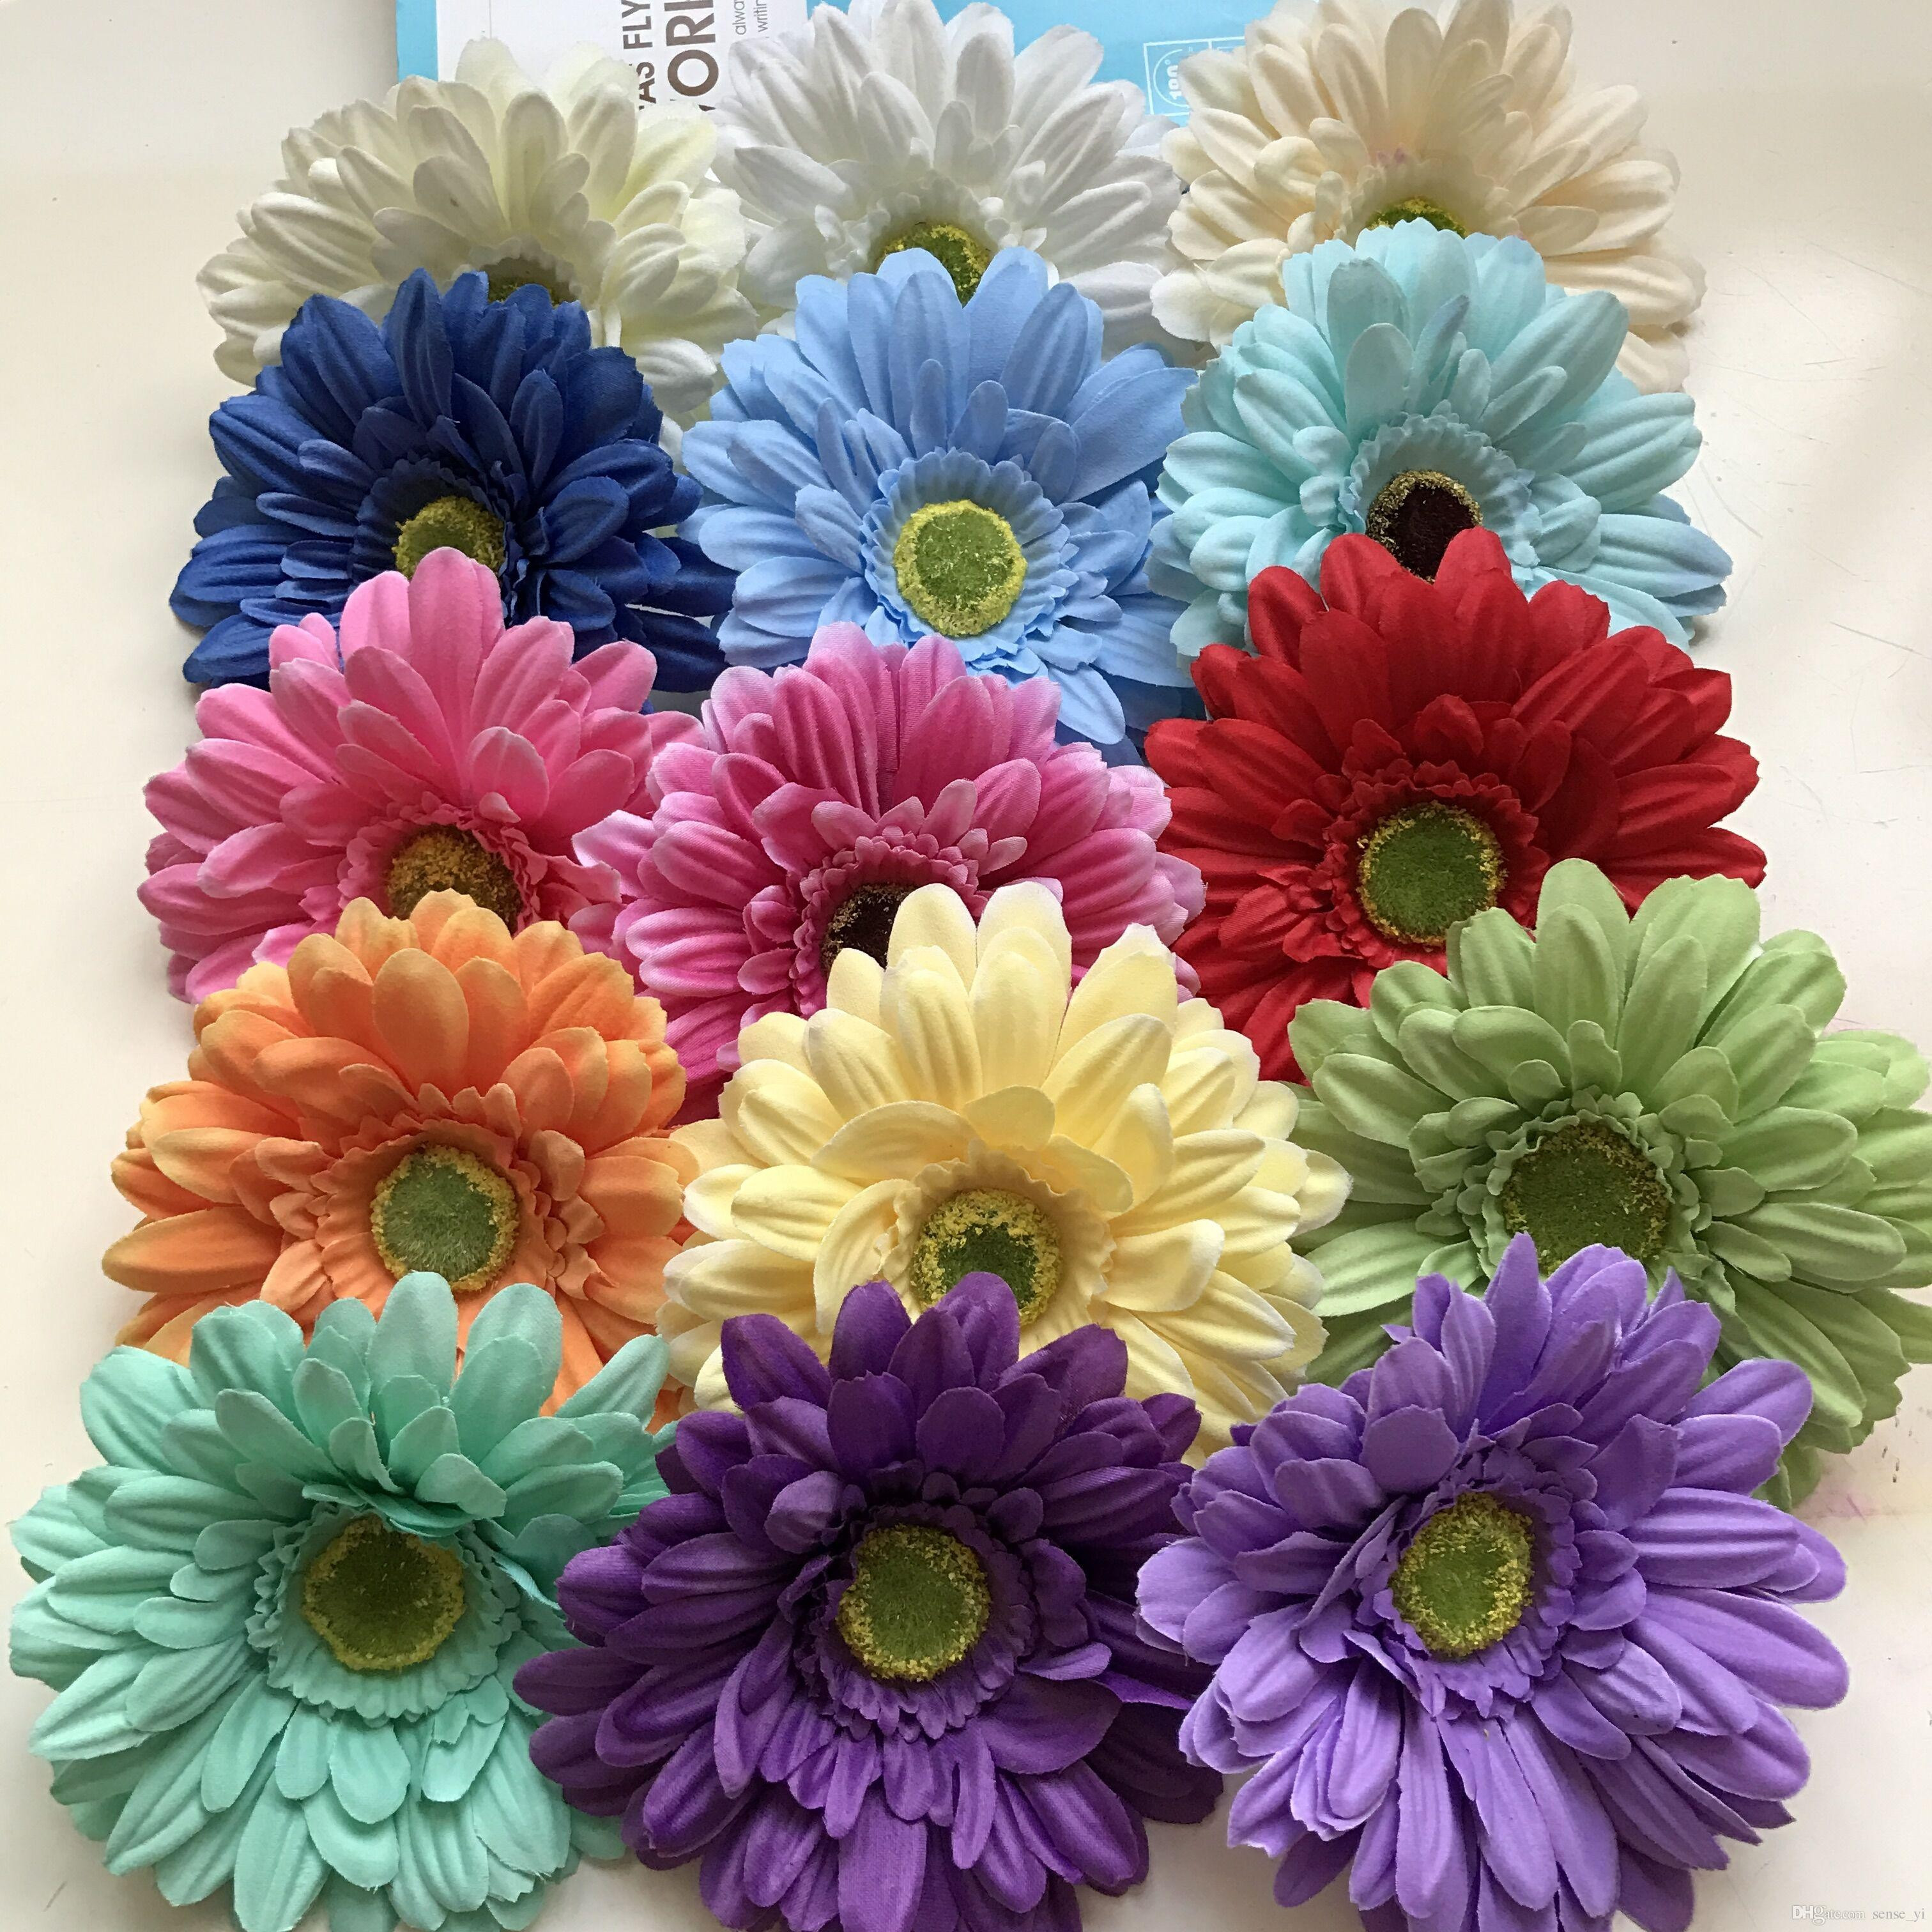 silk flowers for grave vases of fresh silk flowers garden decor home doyanqq me with silk daisy artificial flowers for wedding home decoration 13cm chrysanthemum mariage flores decorative flowers plants silk